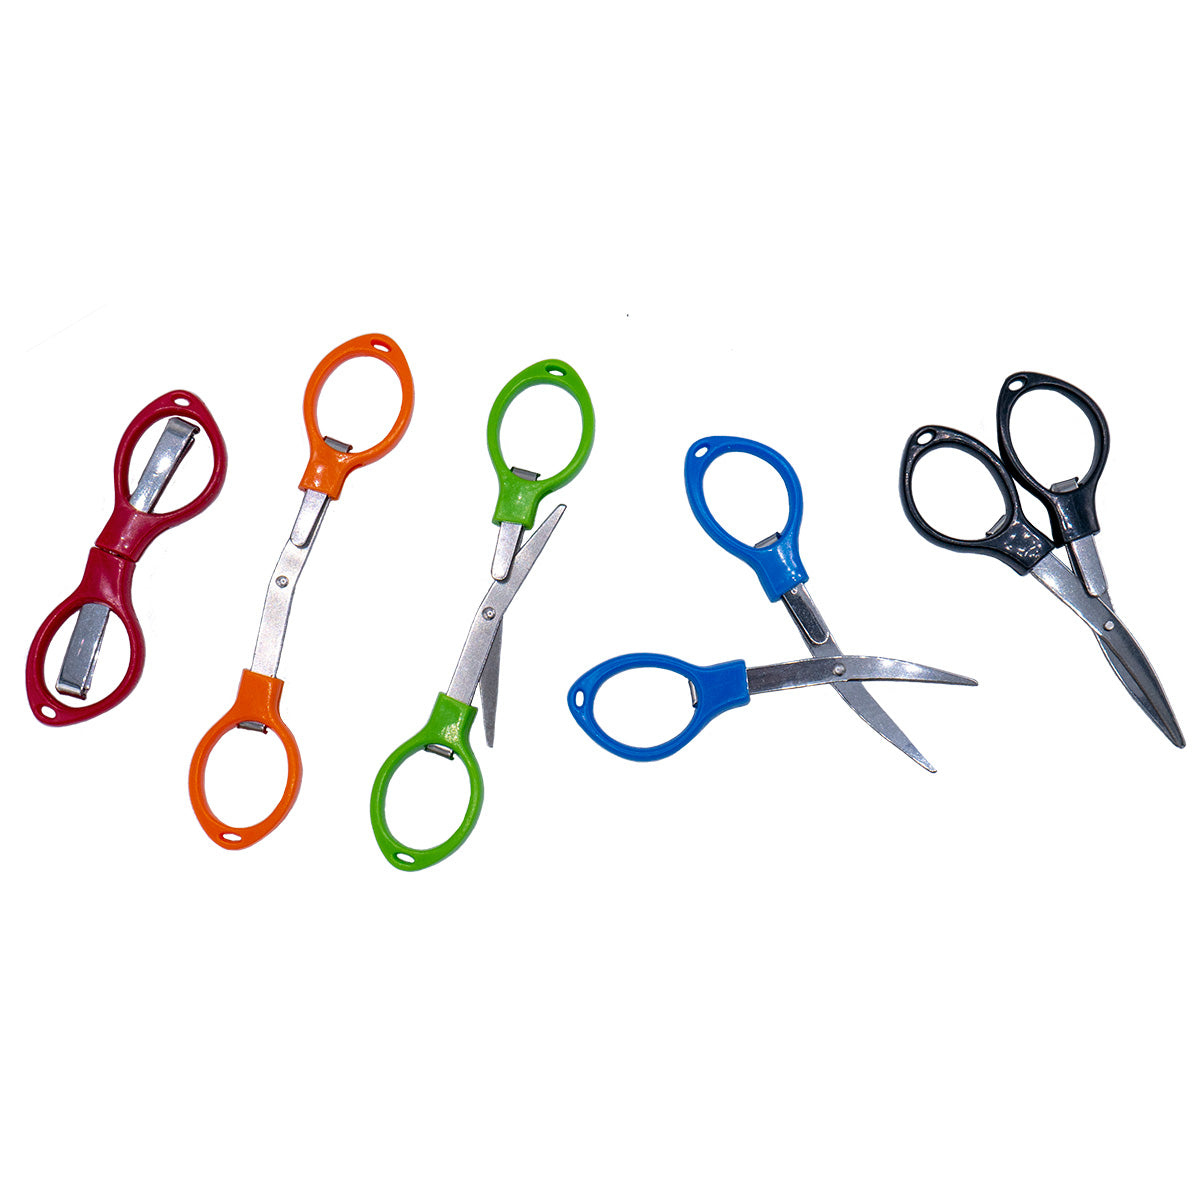 Five pairs of collapsible scissors in varying stages of collapse. From left to right: red scissors completely folded, orange scissors partially unfolded, green scissors in wide open cutting position, blue scissors in half closed cutting position, and black scissors in fully closed cutting position.